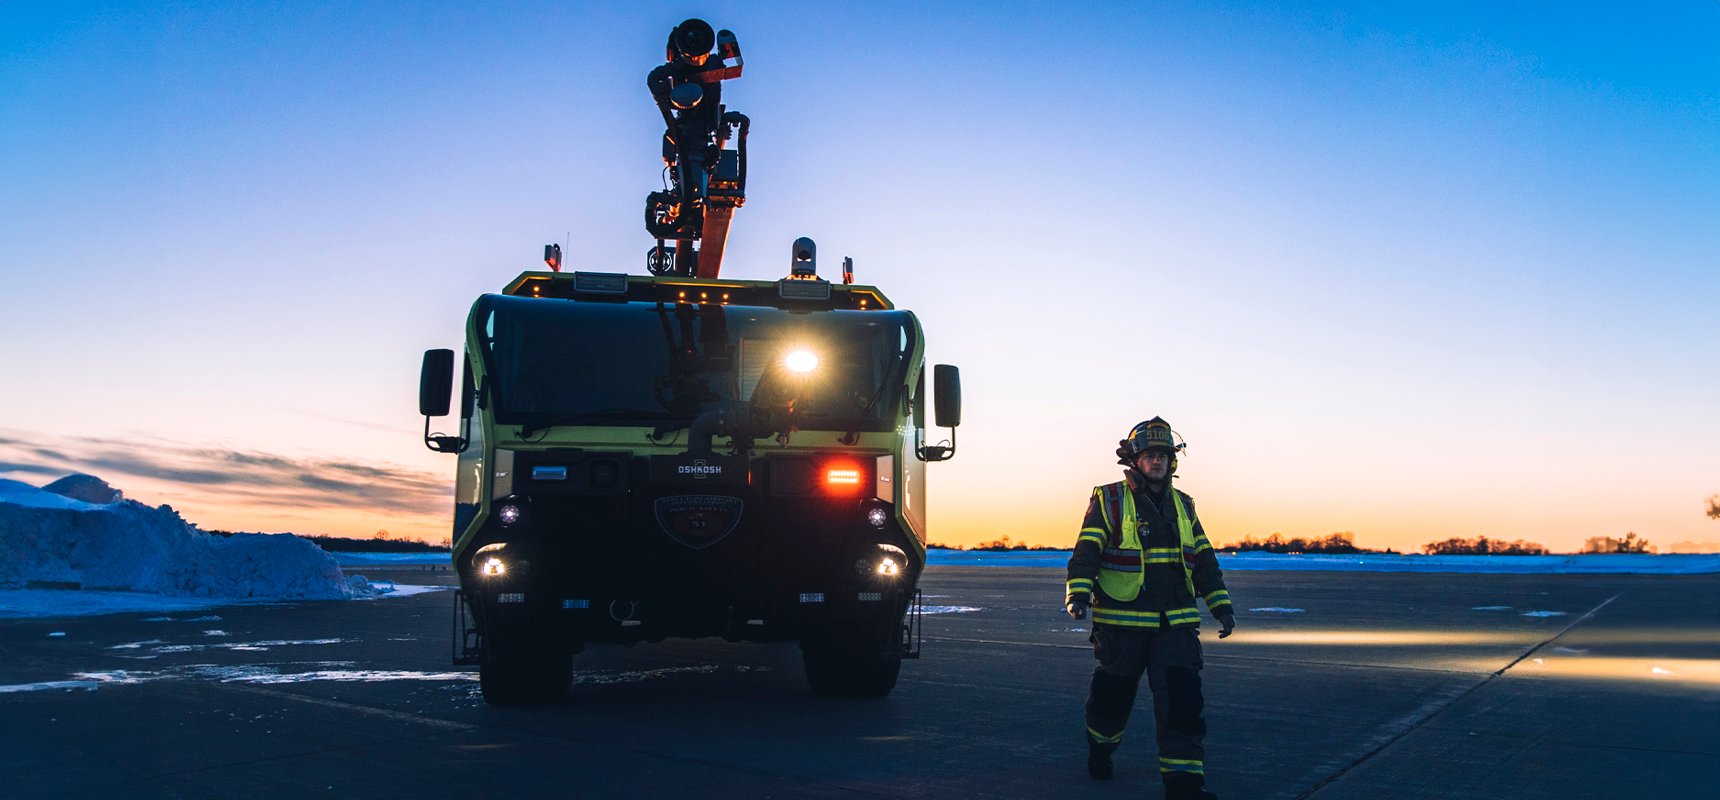 Firefighter standing in front of Striker ARFF vehicle at sunrise.